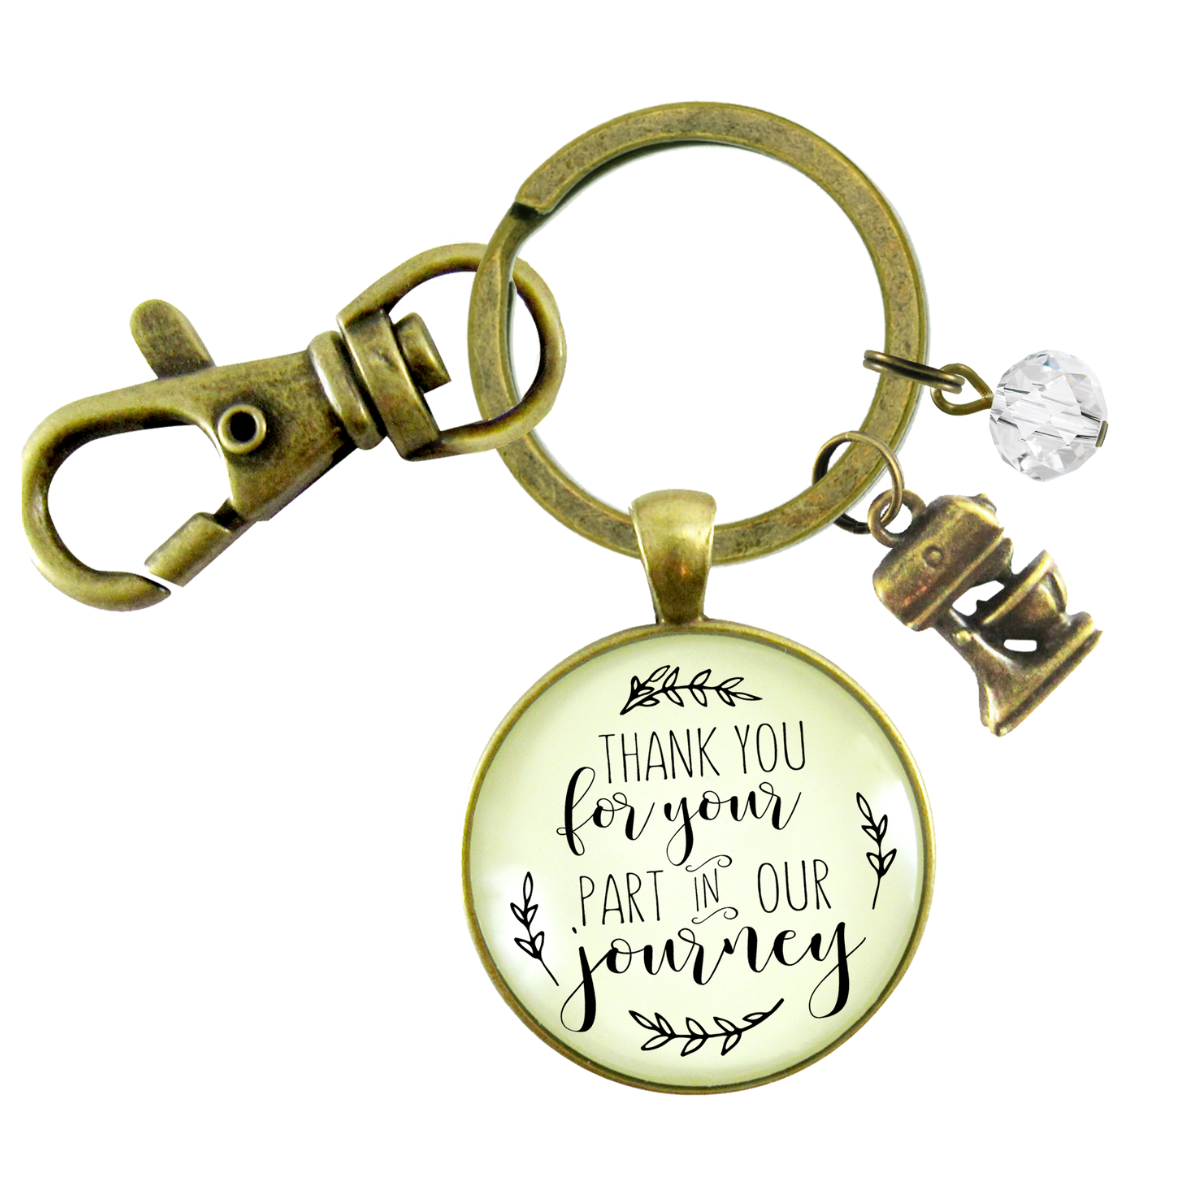 Wedding Cake Baker Gift Keychain Thank You for Your Part Mixer Charm  Keychain - Women - Gutsy Goodness Handmade Jewelry